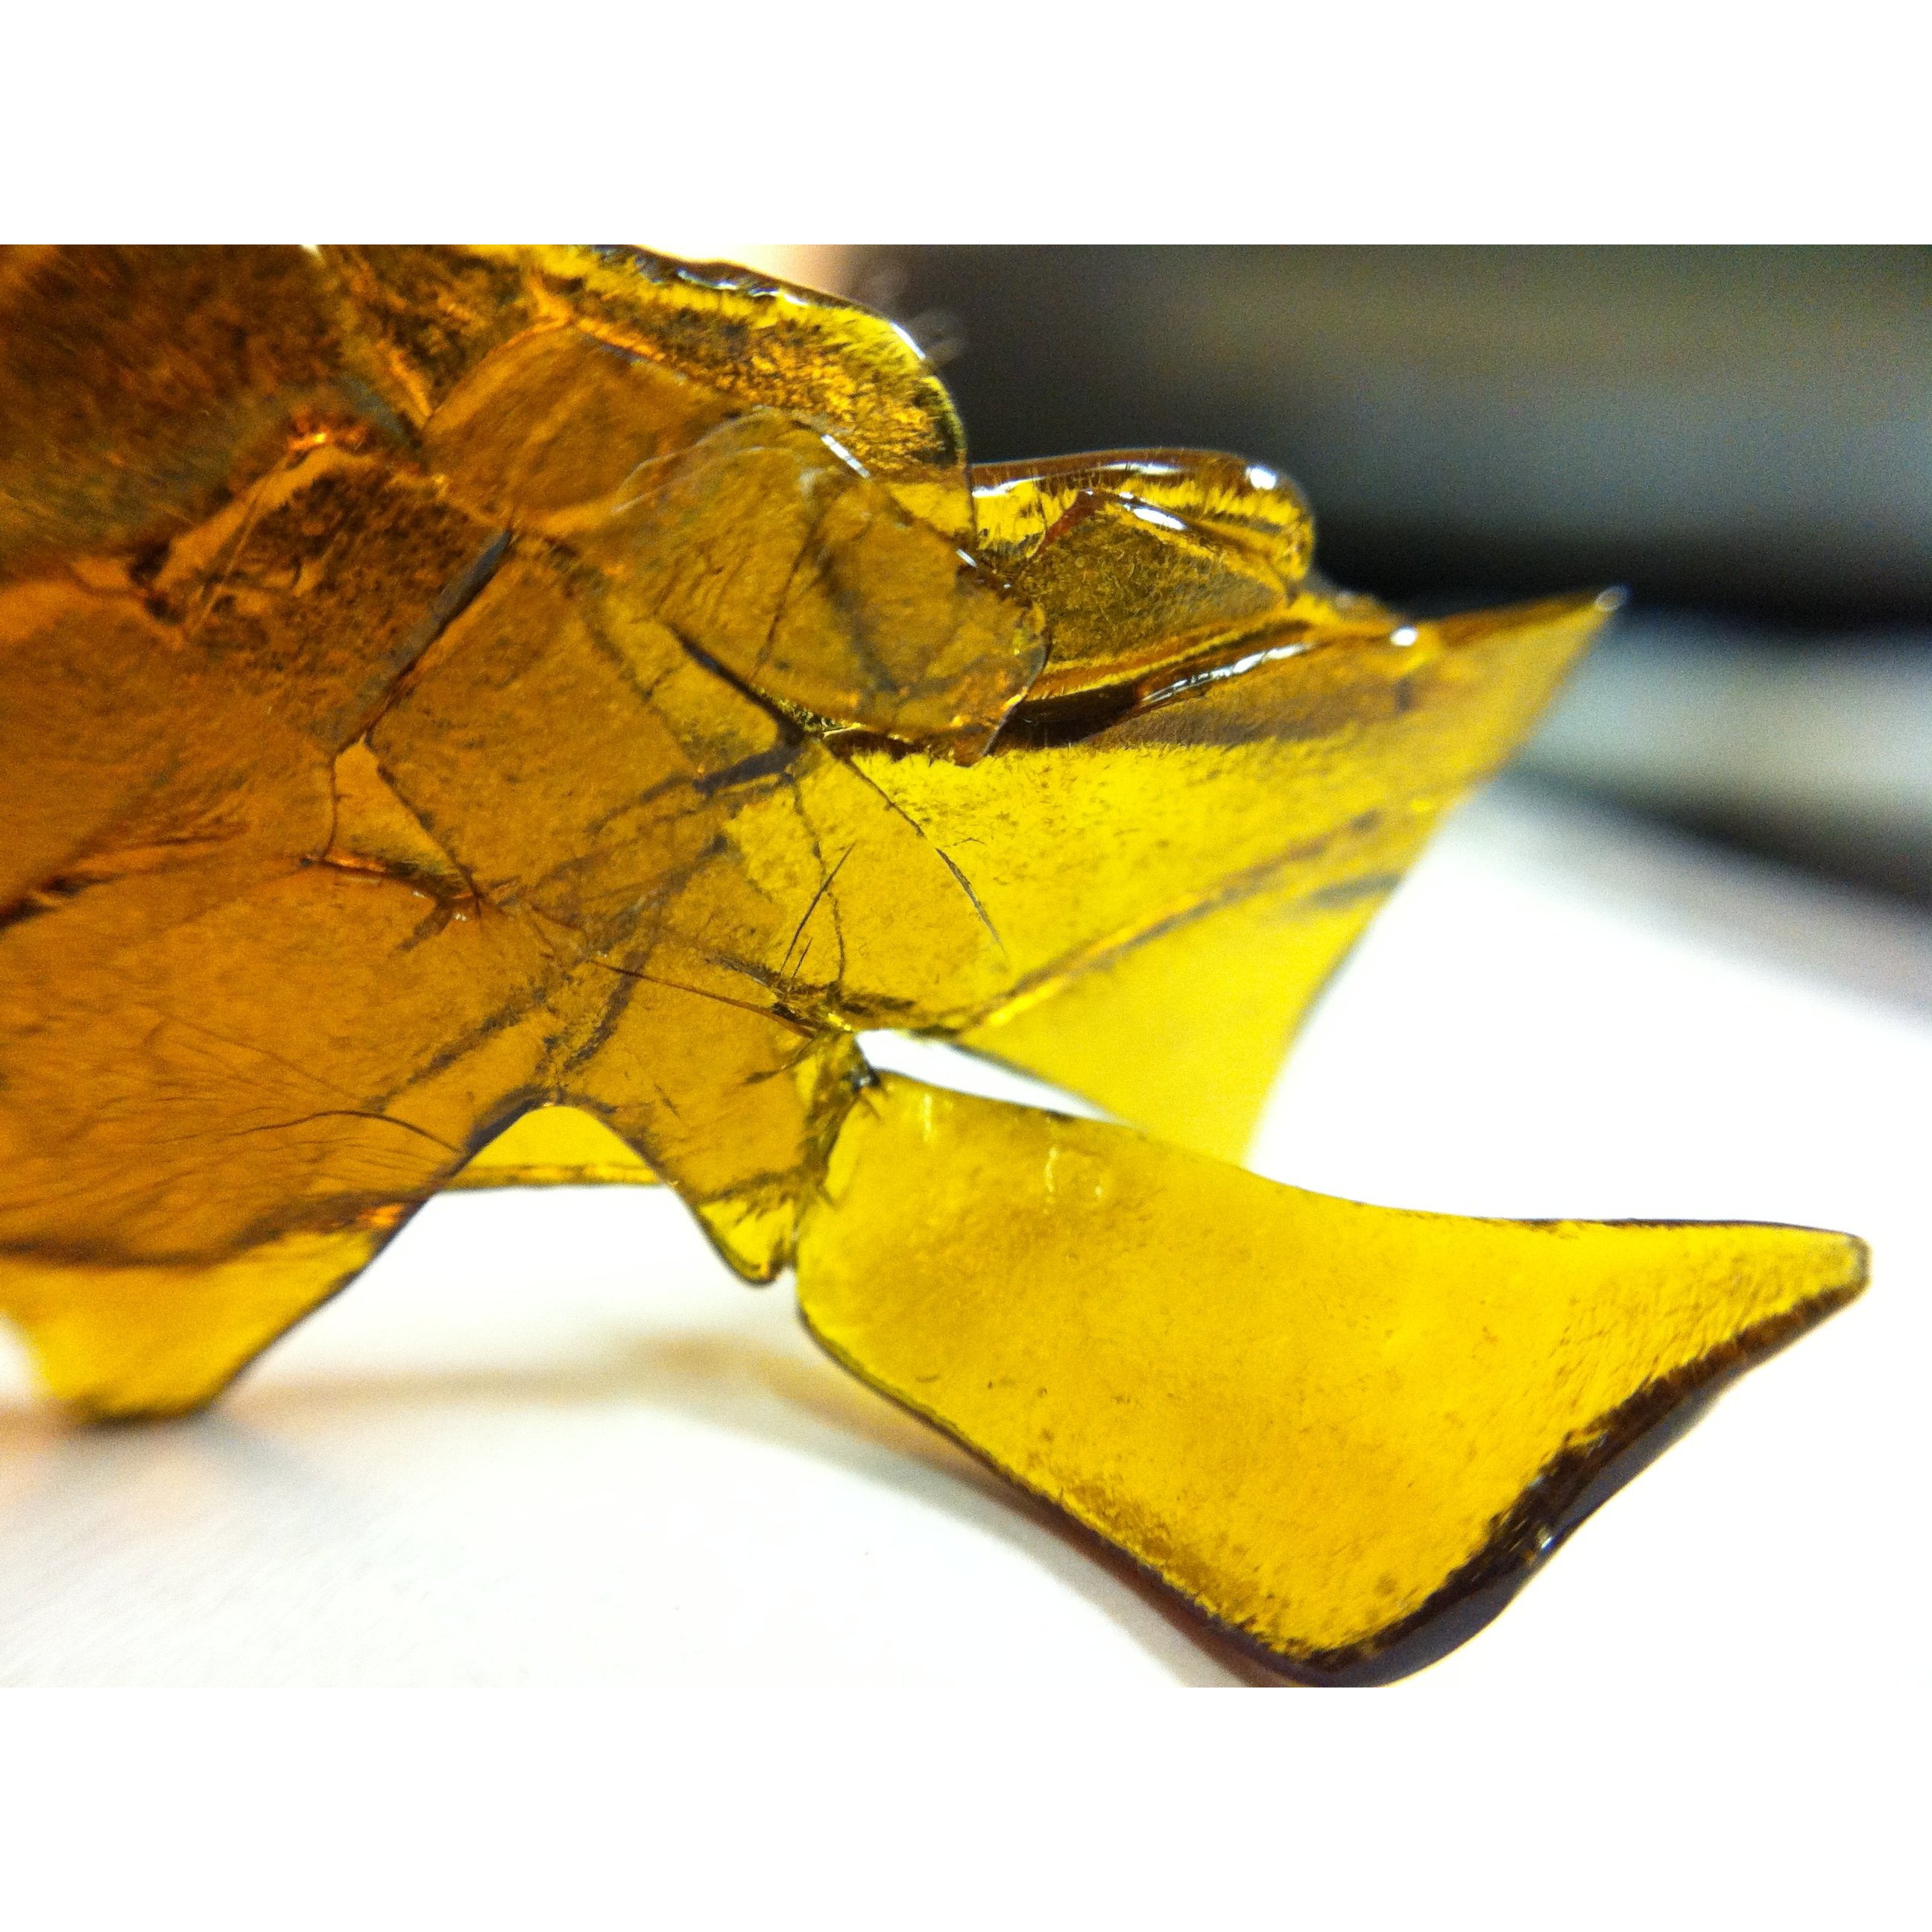 wax shatter or crumble